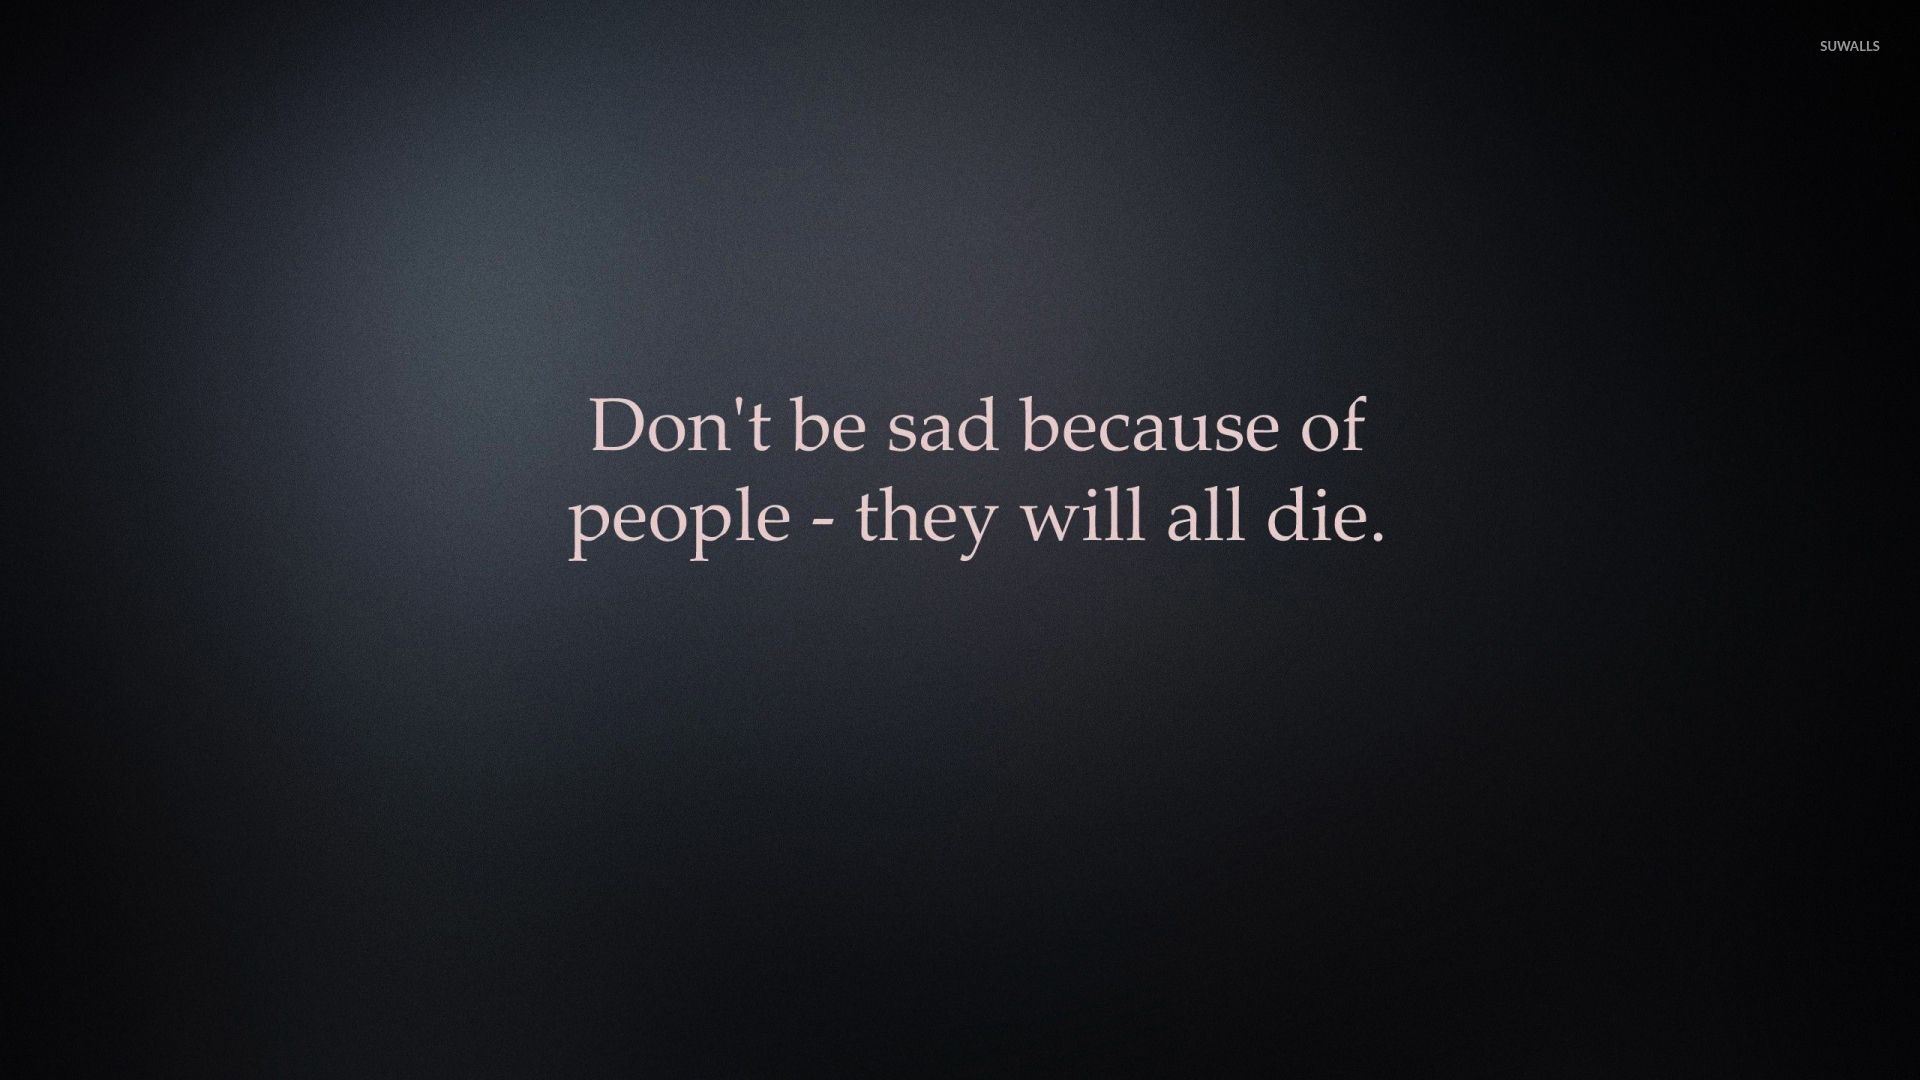 Don't be sad because of people wallpaper wallpaper